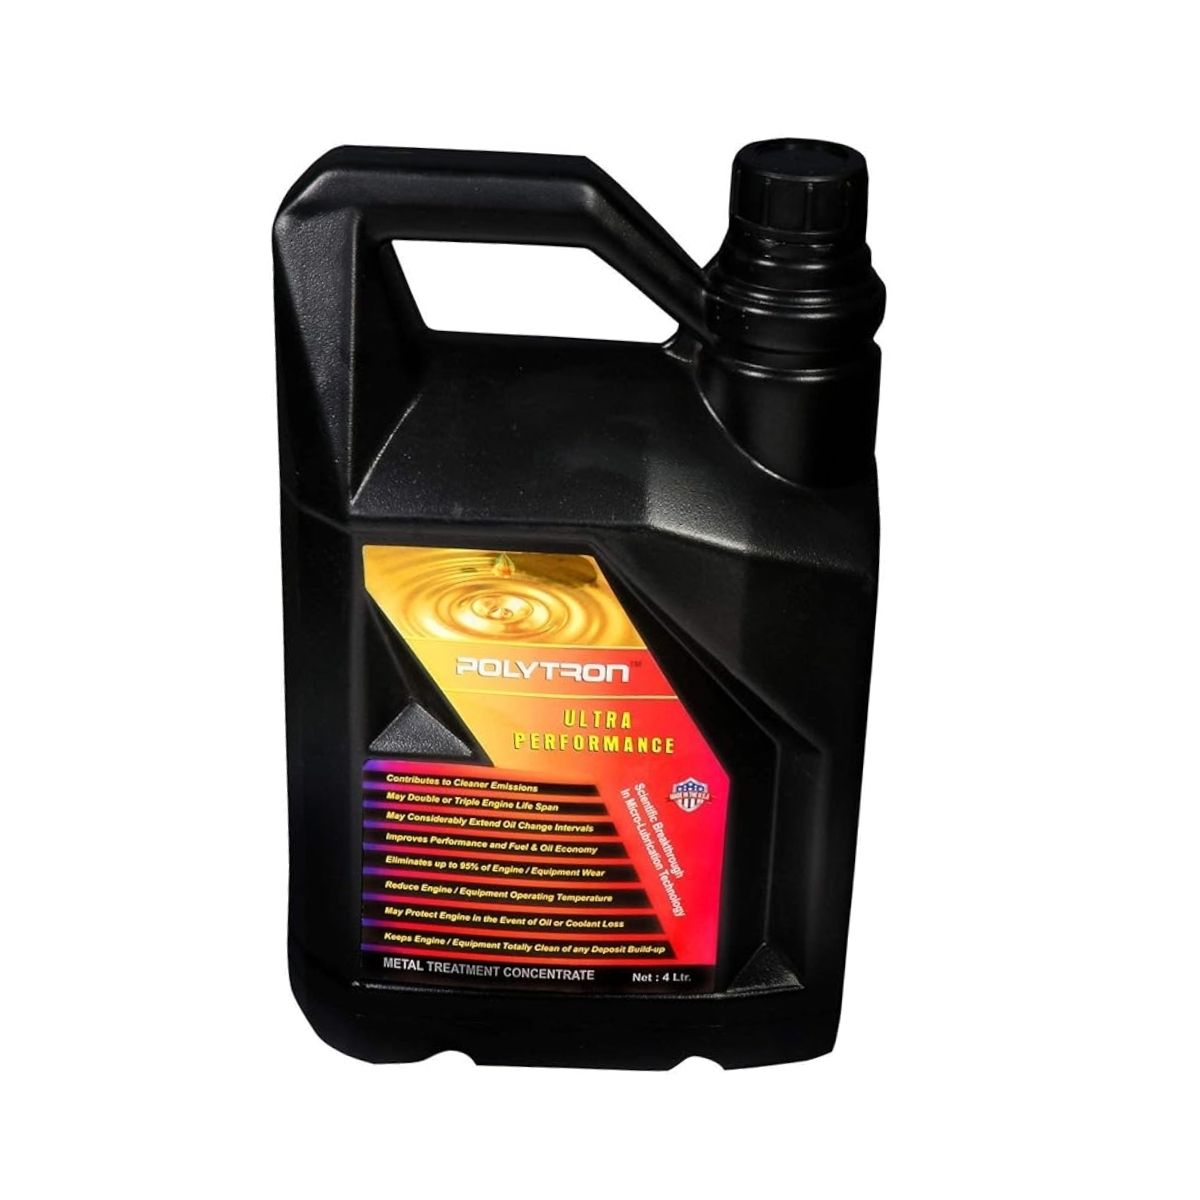 Metal Treatment Concentrate - Engine Oil Additive - Bulk Pack 1